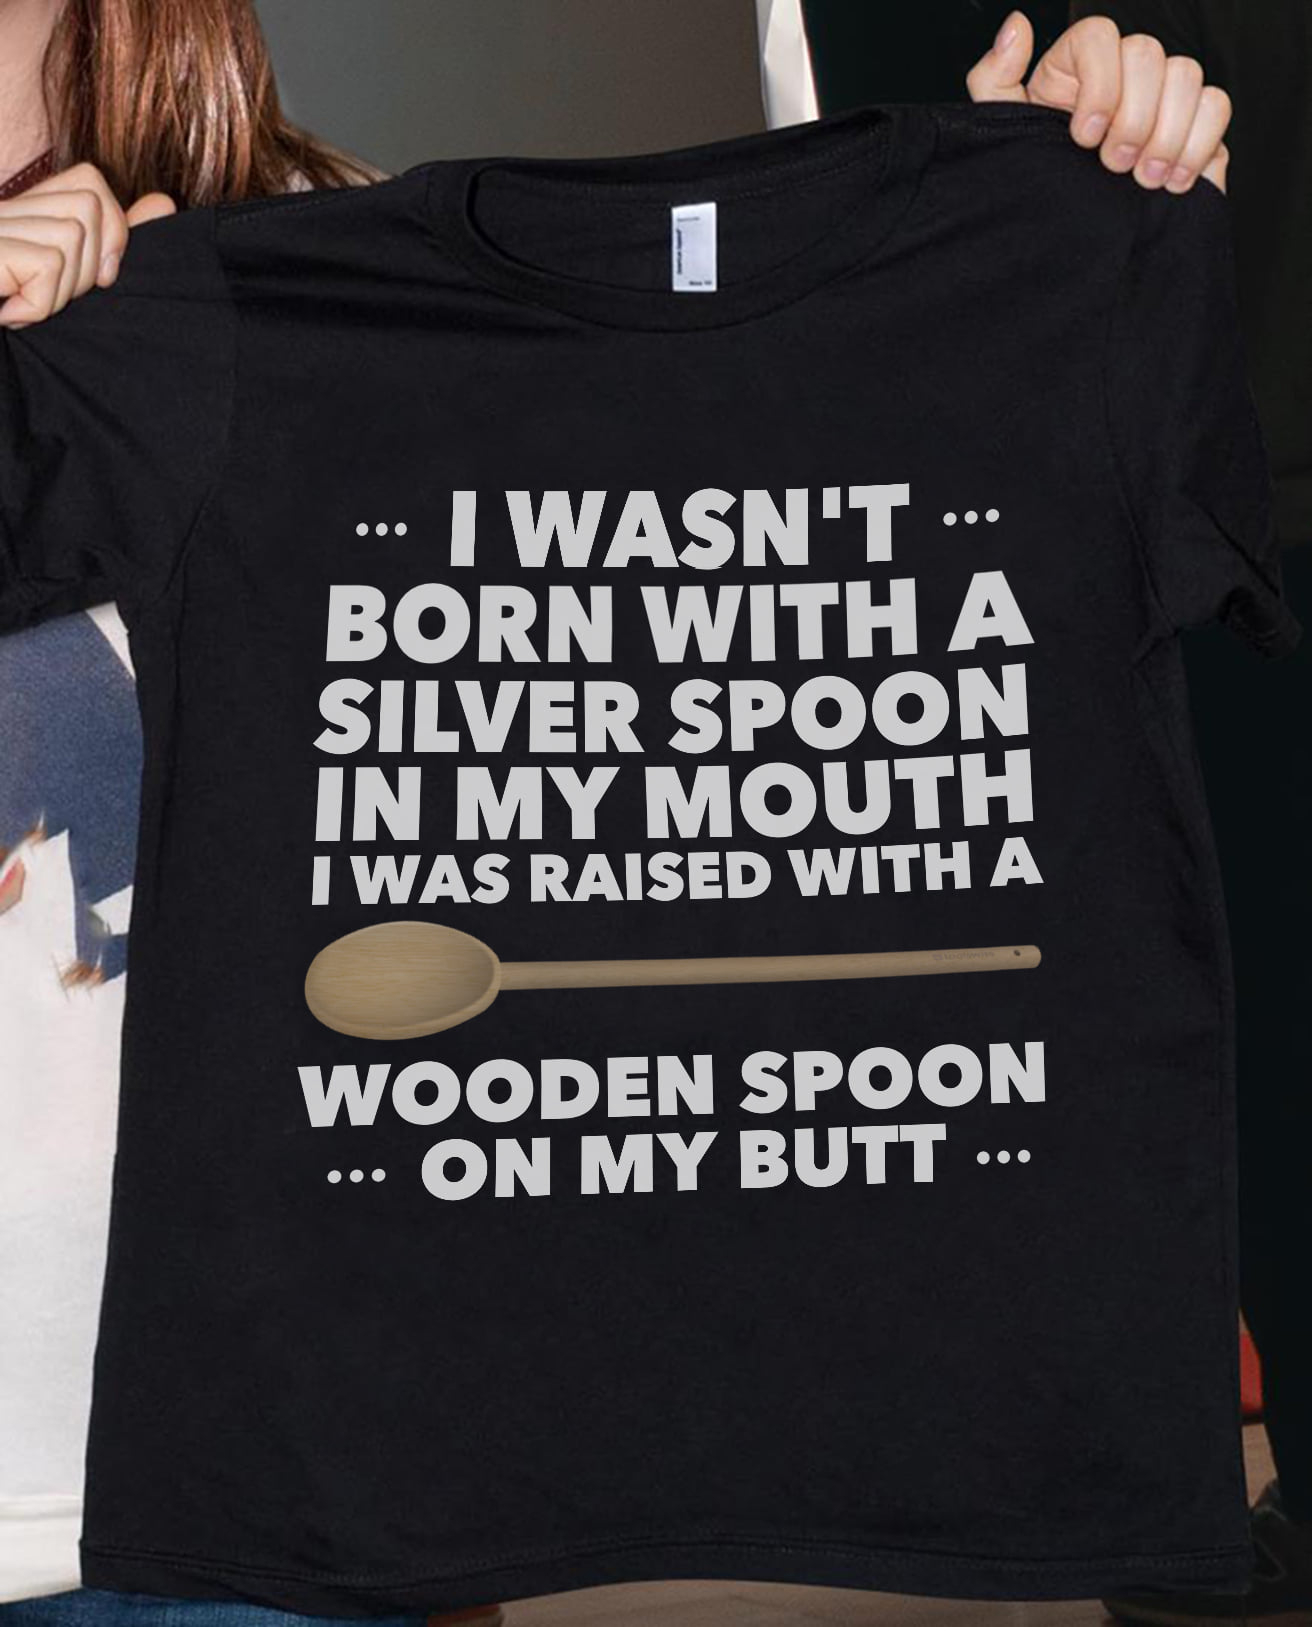 I wasn’t born with a silver spoon in my mouth I was raised with a wooden spoon on my butt